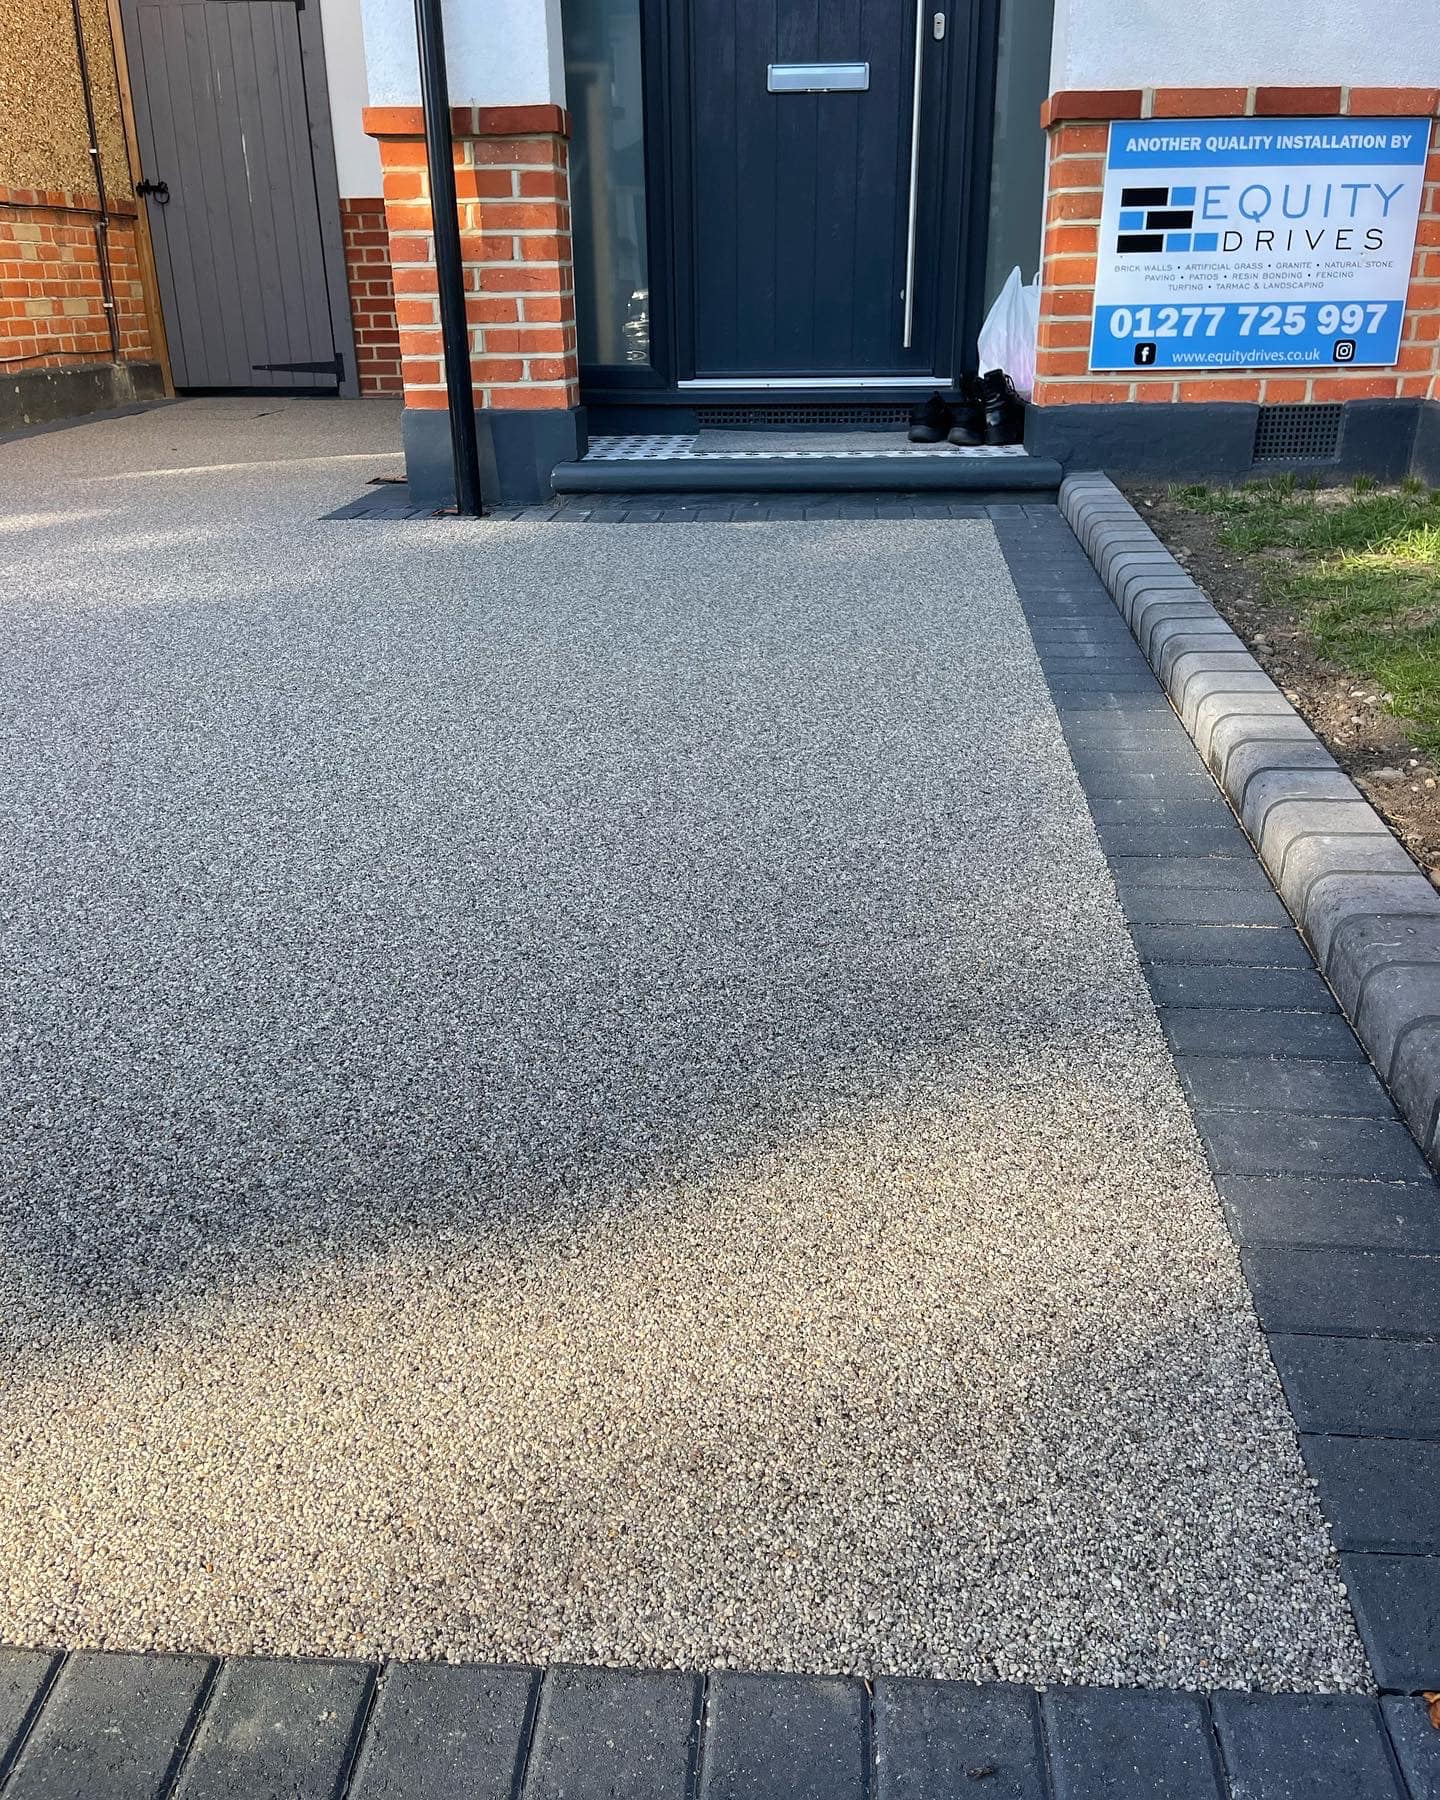 Block Paving vs Tarmac: How to Maintain Your Driveway?